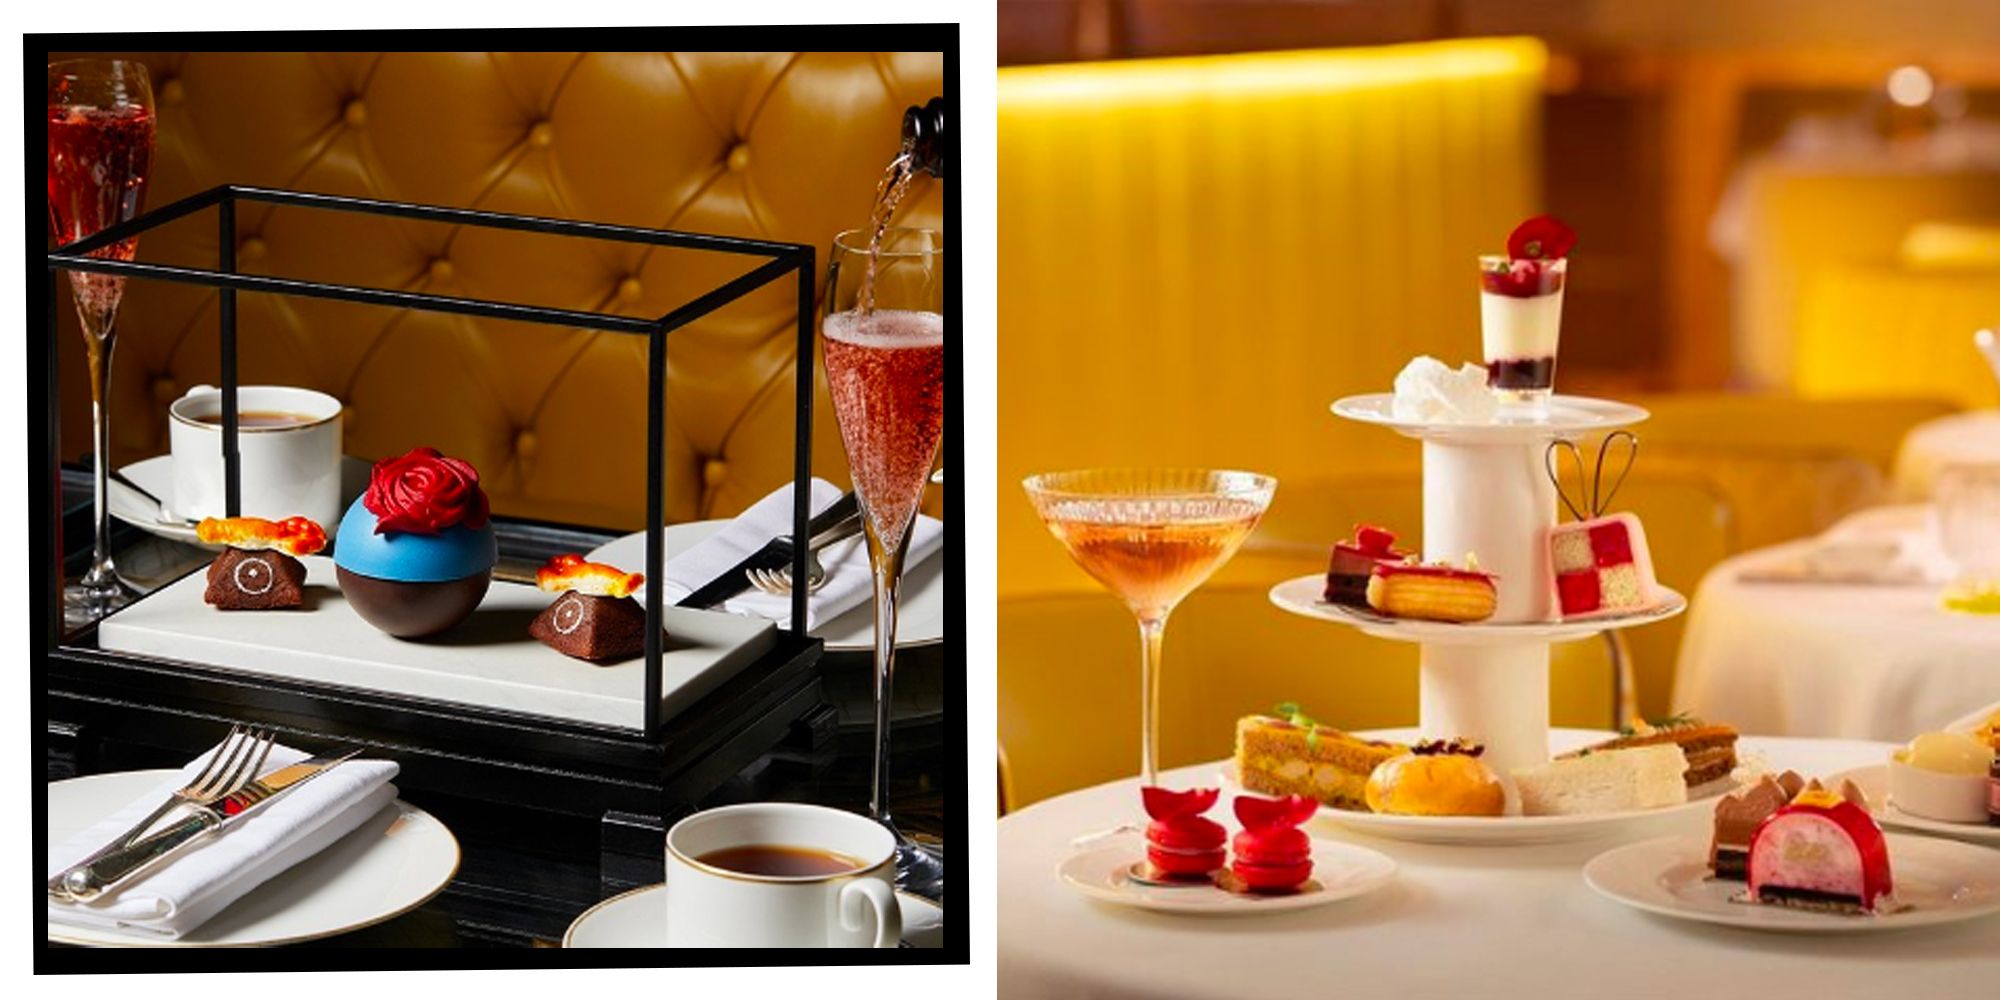 The Best Afternoon Teas In London, According To The Experts